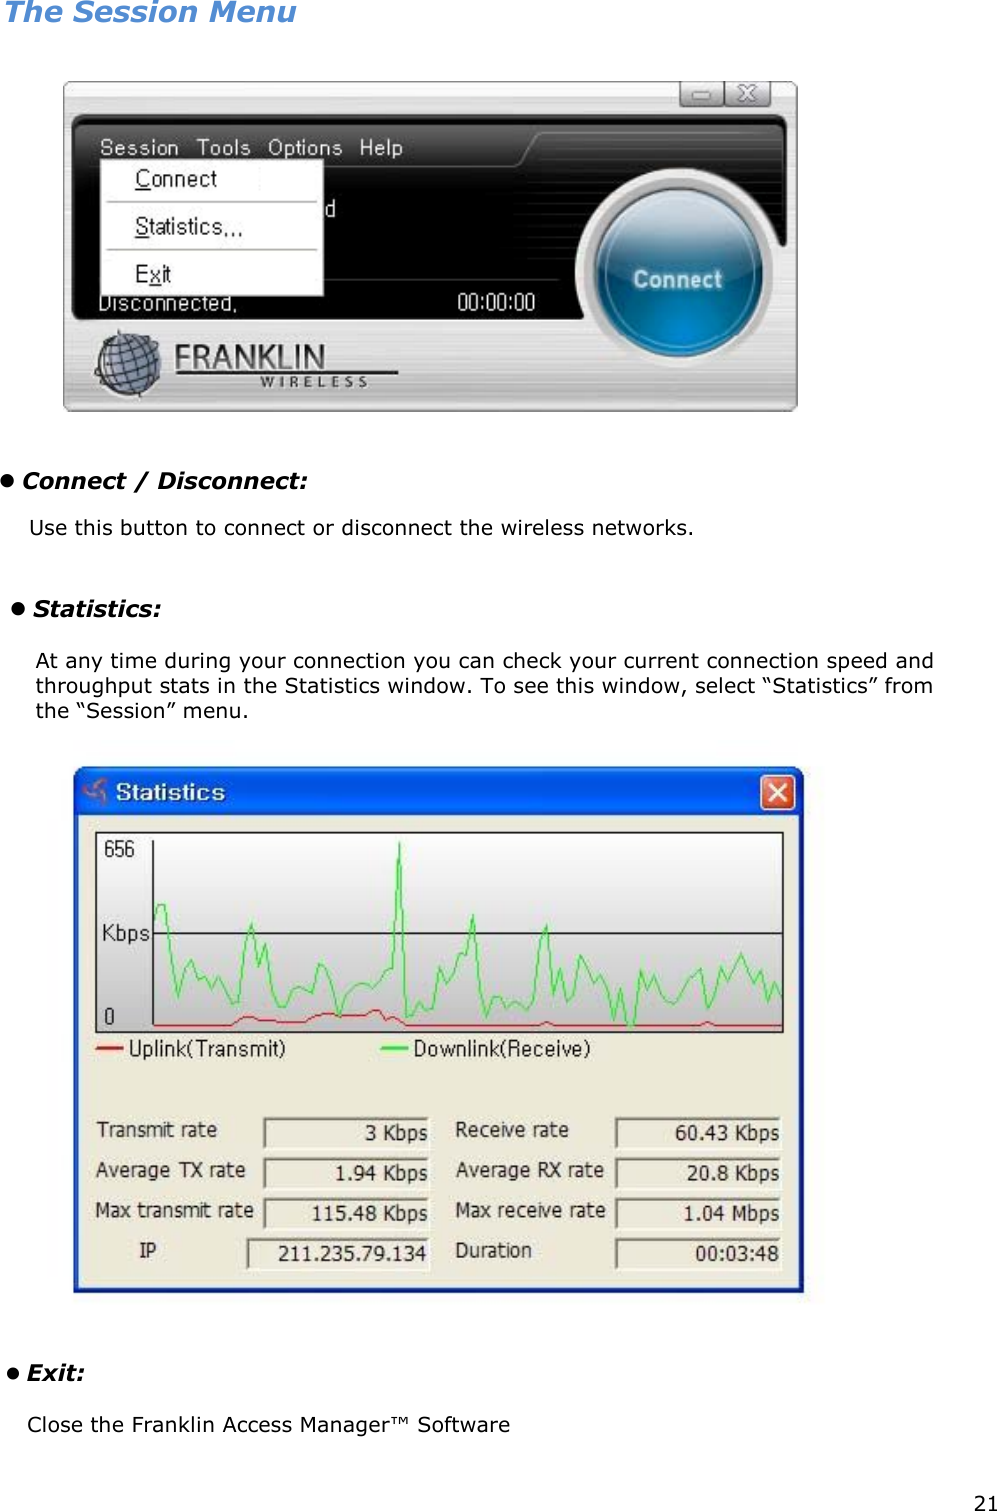 21     The Session Menu         At any time during your connection you can check your current connection speed and throughput stats in the Statistics window. To see this window, select “Statistics” from the “Session” menu.                      Exit:     Connect / Disconnect:   Use this button to connect or disconnect the wireless networks.    Statistics:    Close the Franklin Access Manager™ Software       